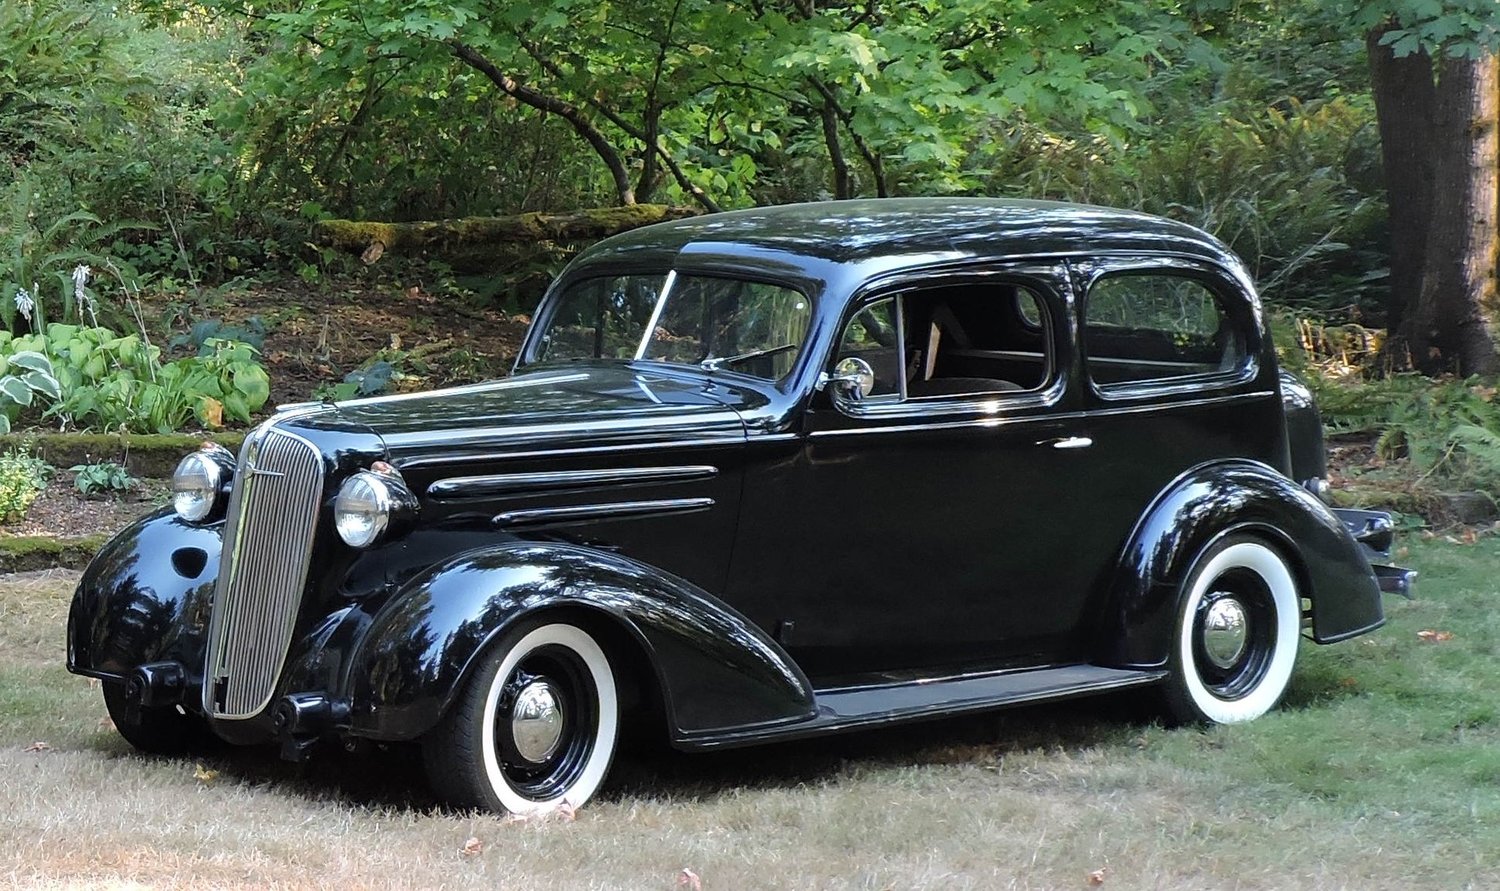 Battle Ground resident Ruth Snodgrass's 1936 two door Chevy Sedan has a 292 inline six and automatic transmission.